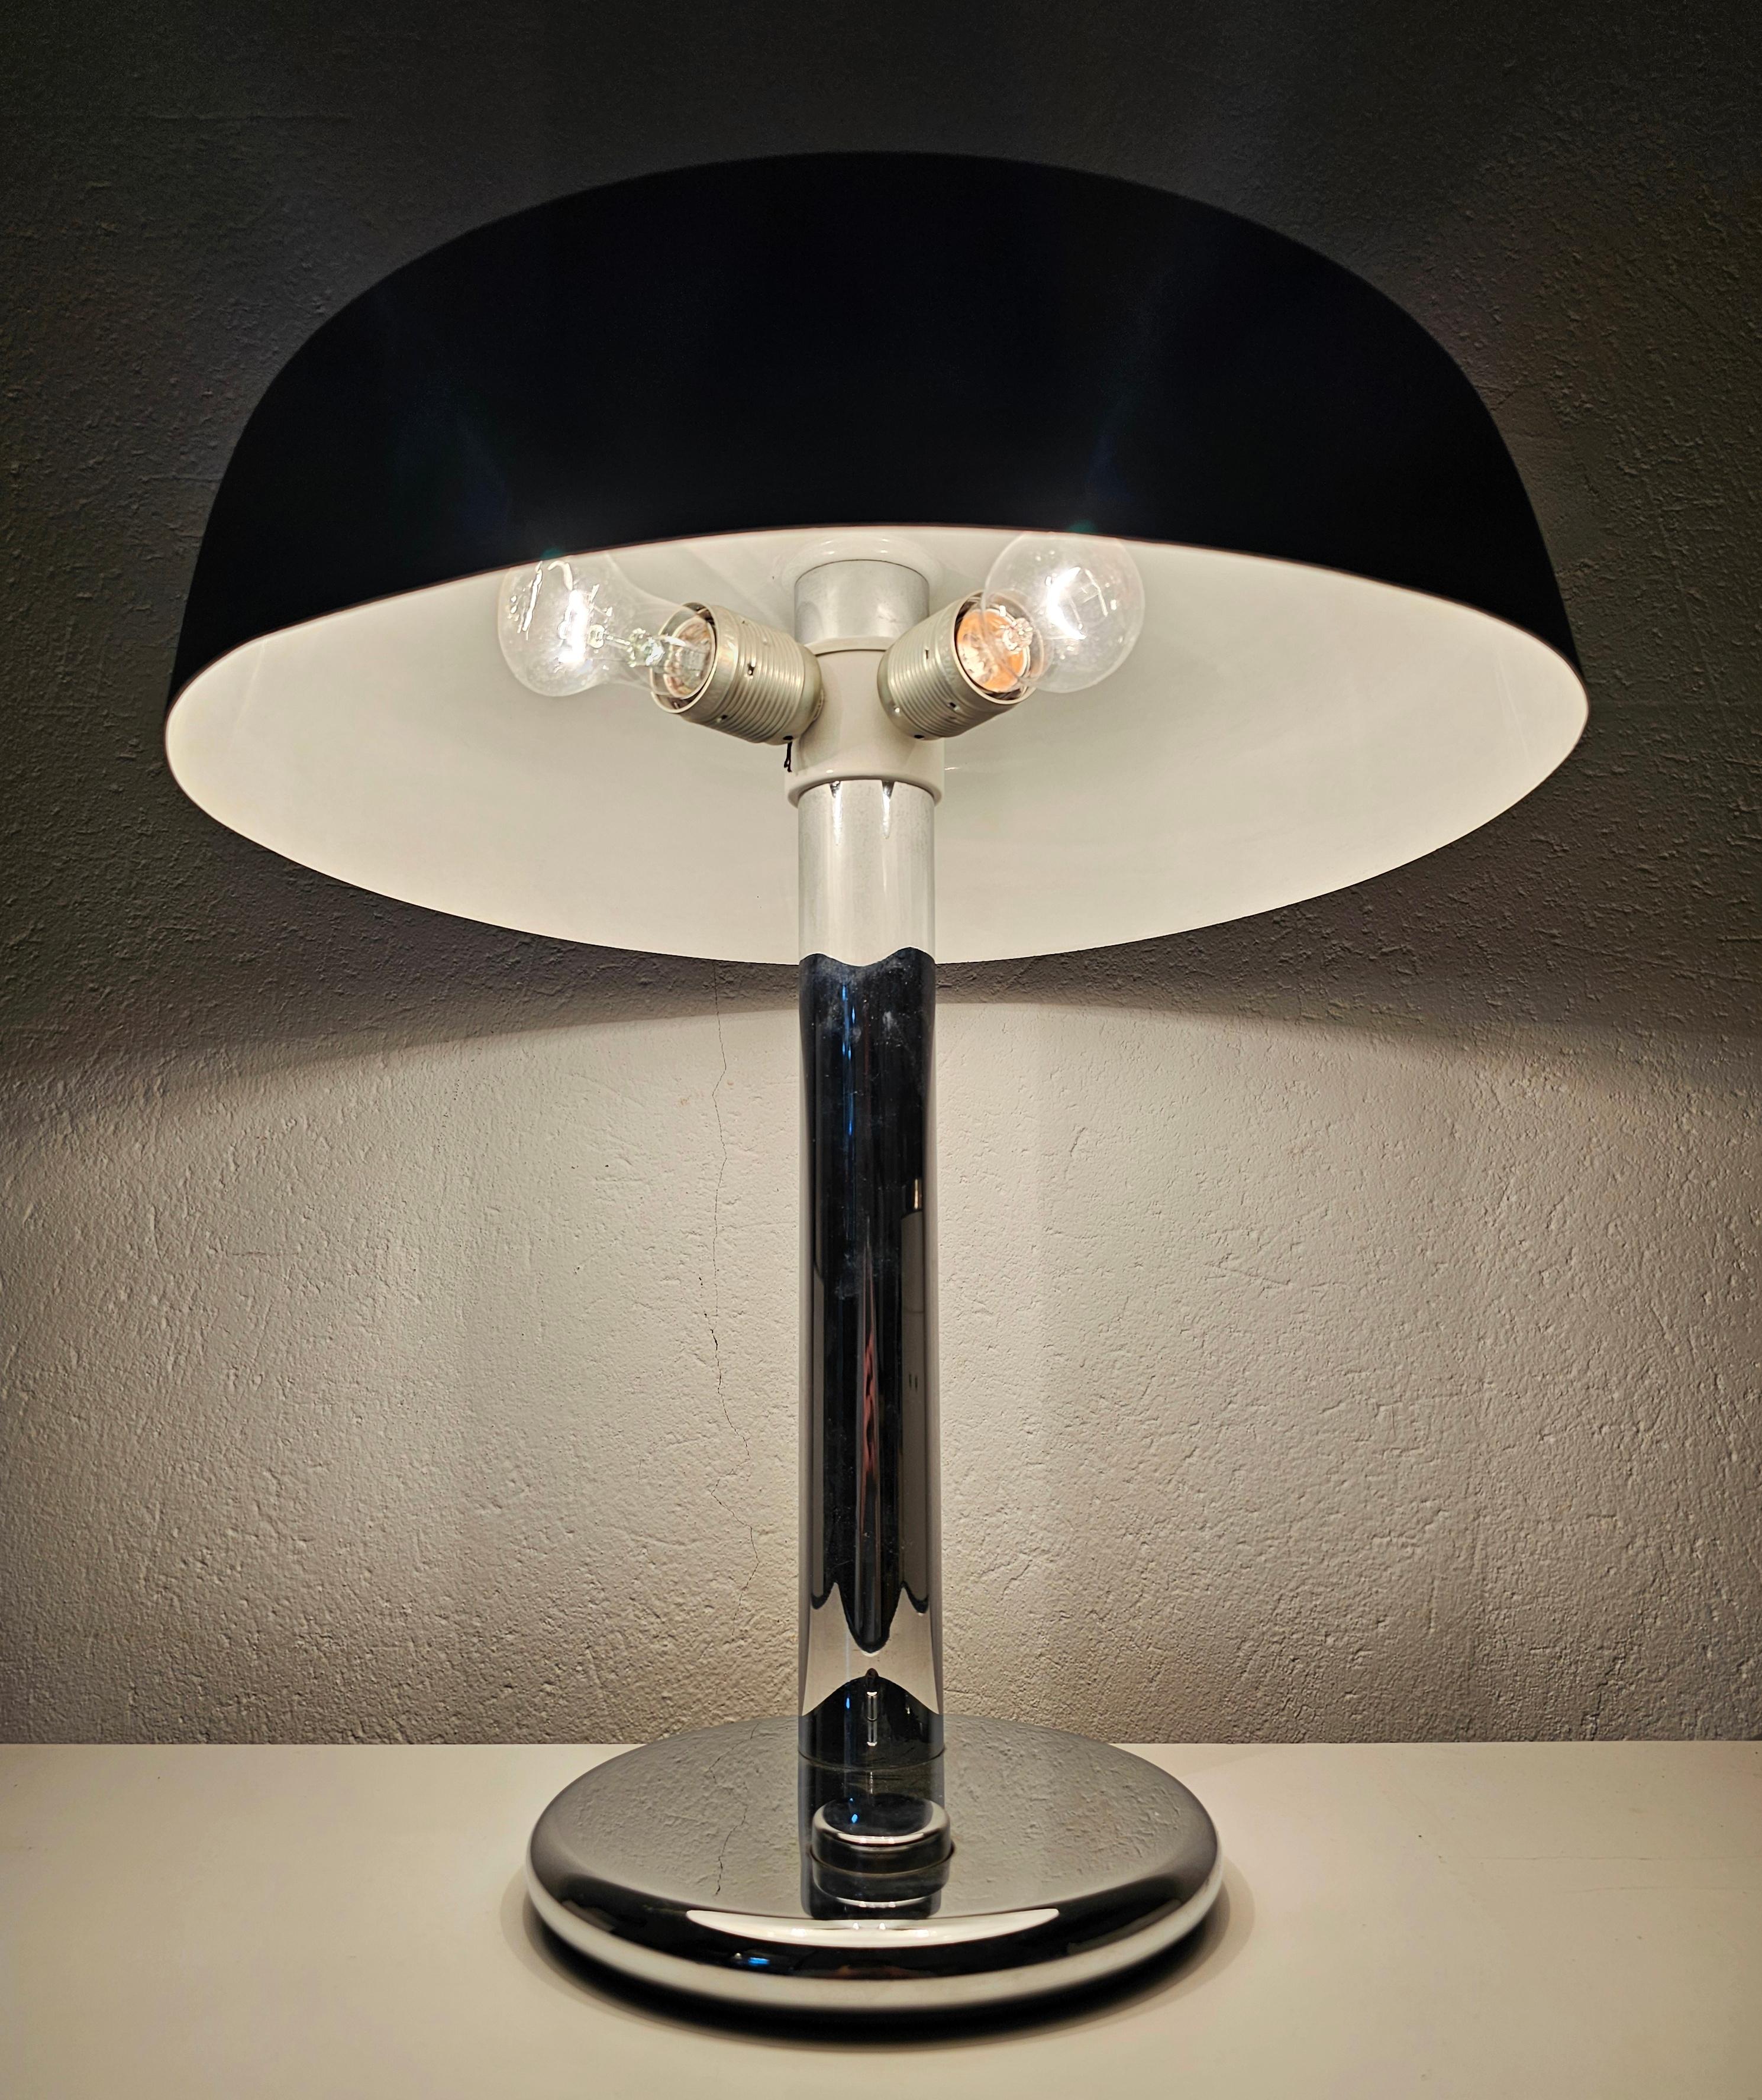 Bauhaus Style Table Lamp Model 7603 designed by Heinz Pfaender for Hillebrand  For Sale 3